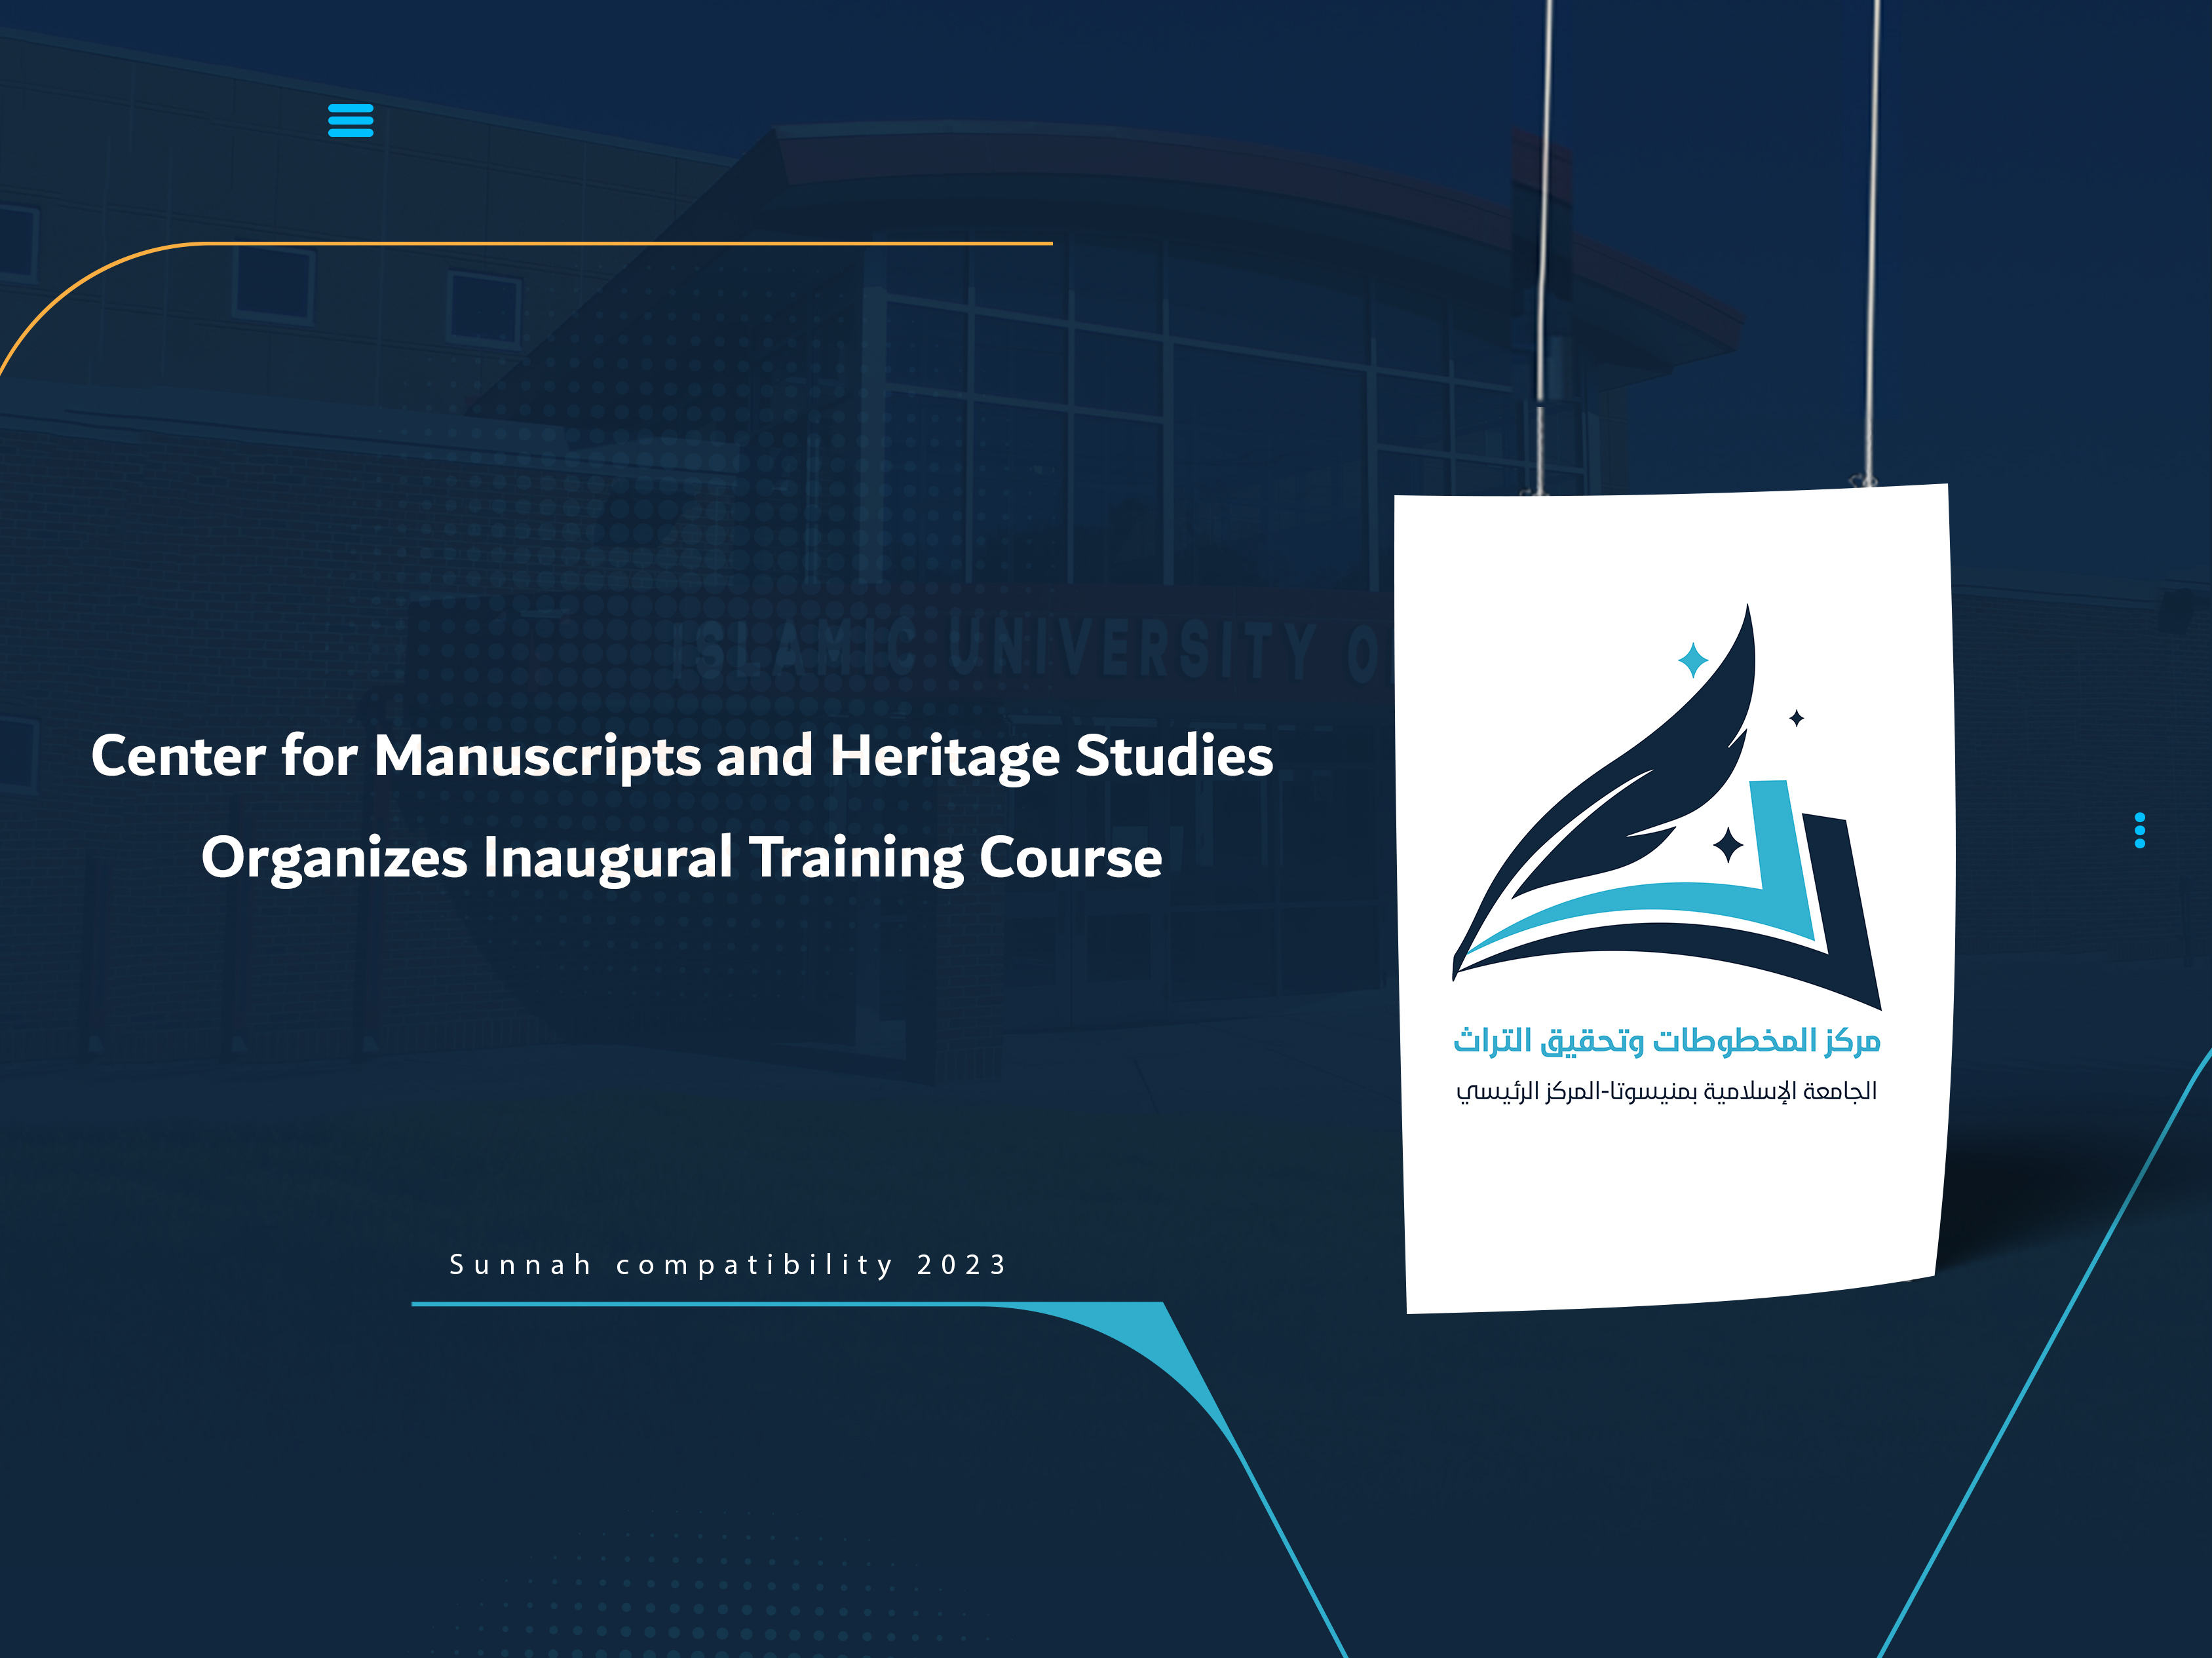 Center for Manuscripts and Heritage Studies Organizes Inaugural Training Course